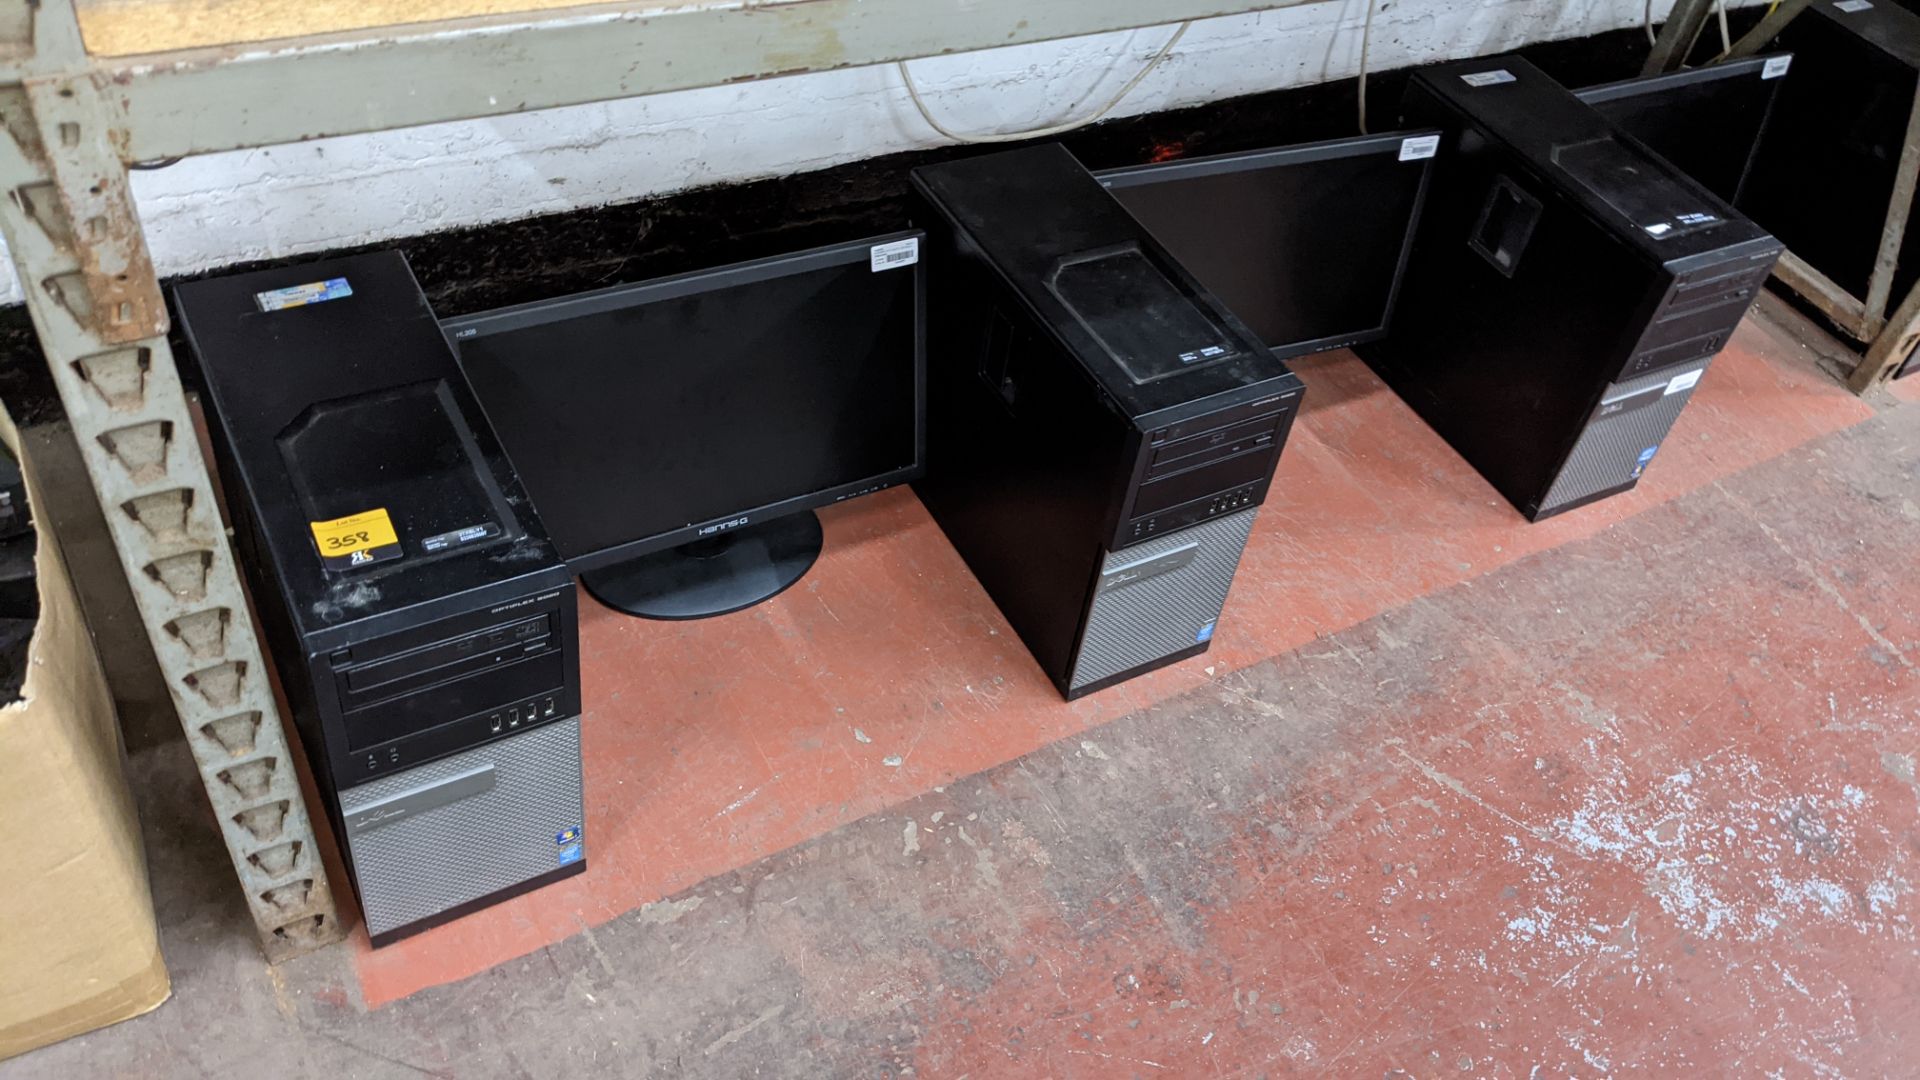 3 off Dell Optiplex assorted tower computers, each with monitor - no cables, keyboards, mice or othe